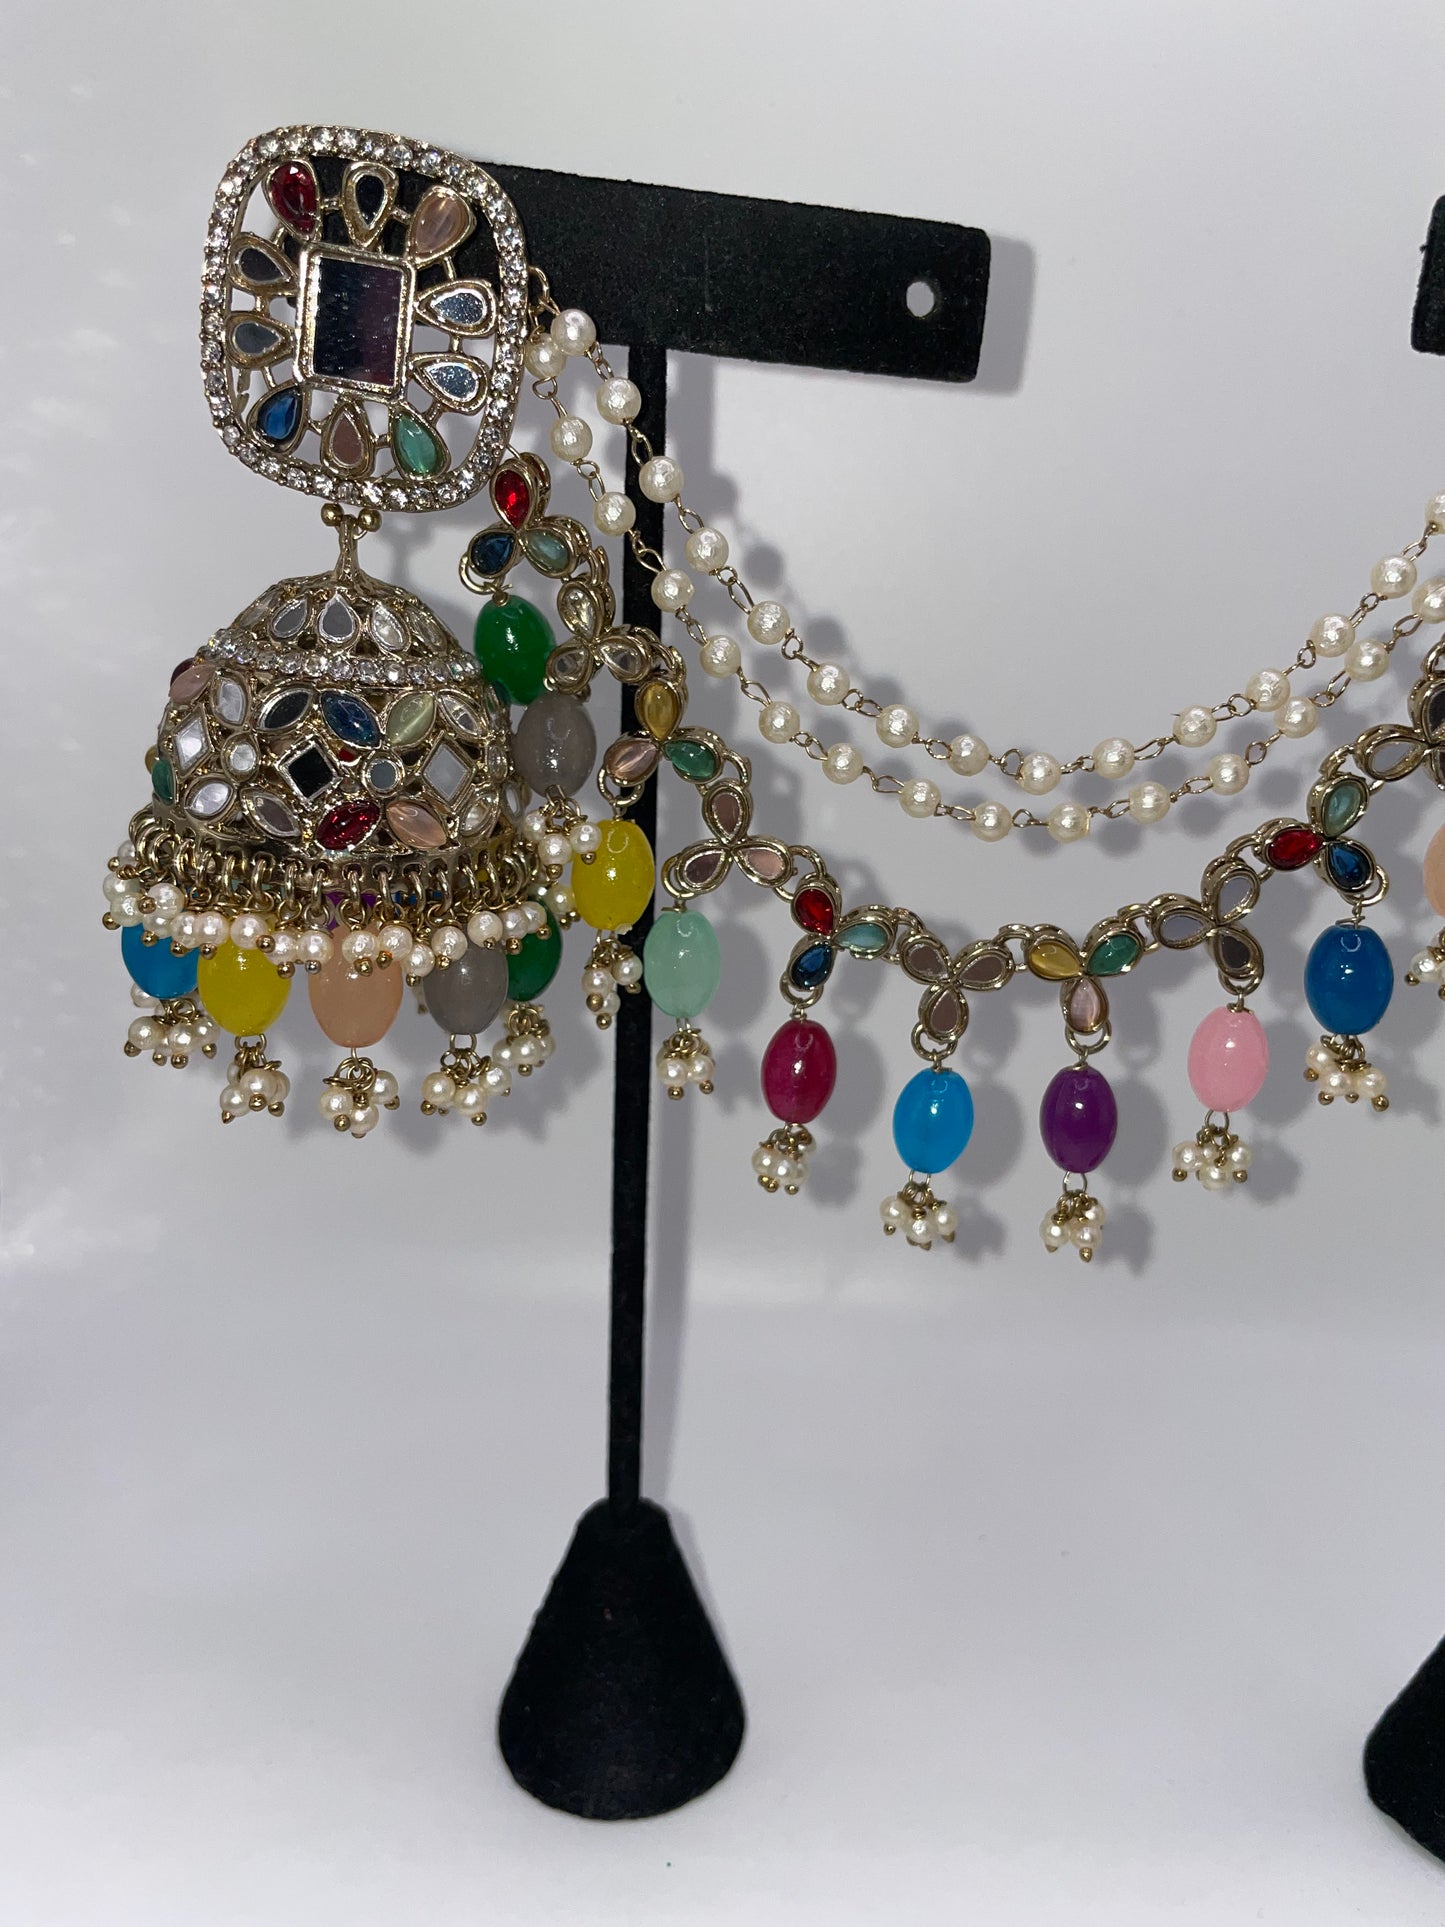 Earrings with earrings chains and tikko